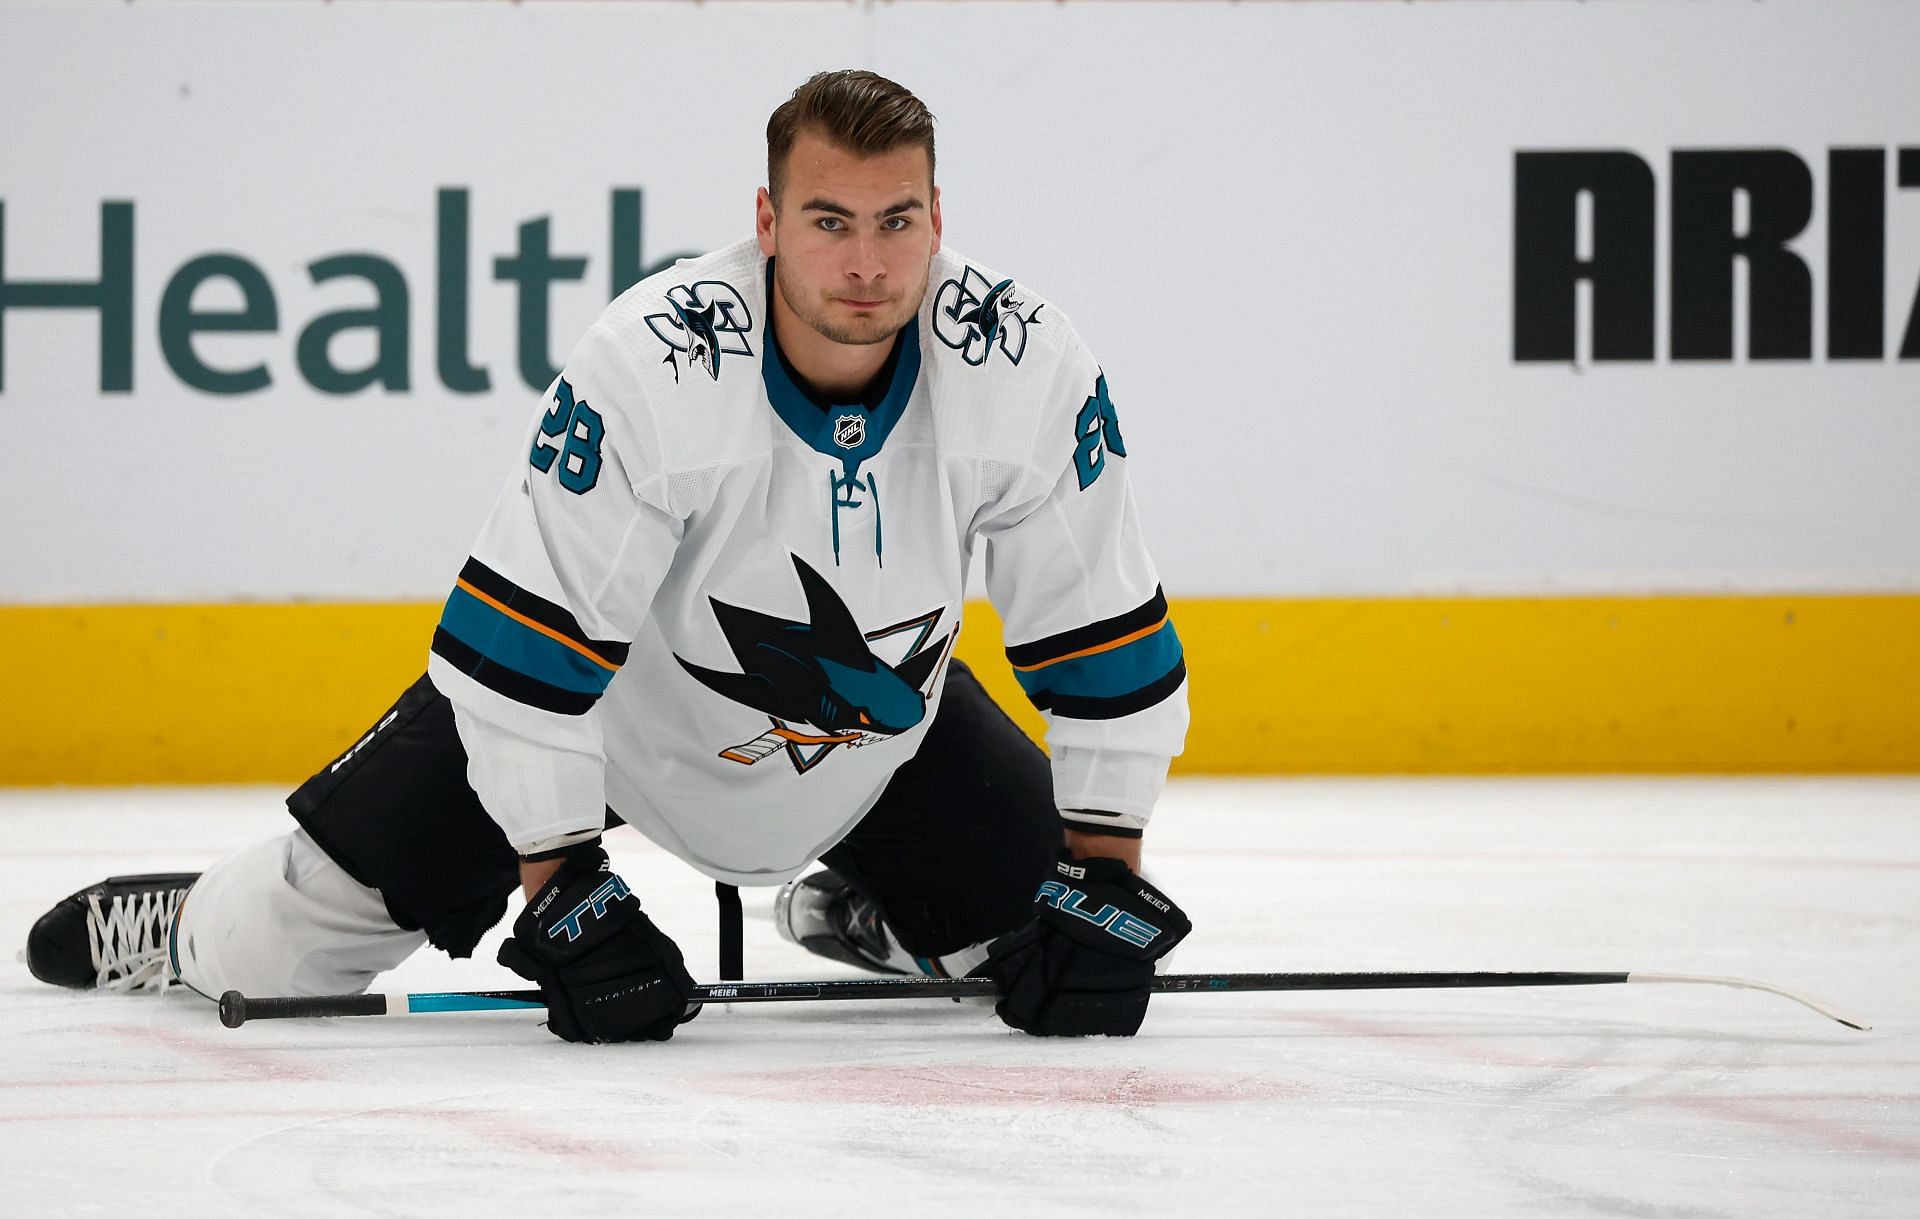 Two Teams That Could Land San Jose Sharks Timo Meier at The Deadline